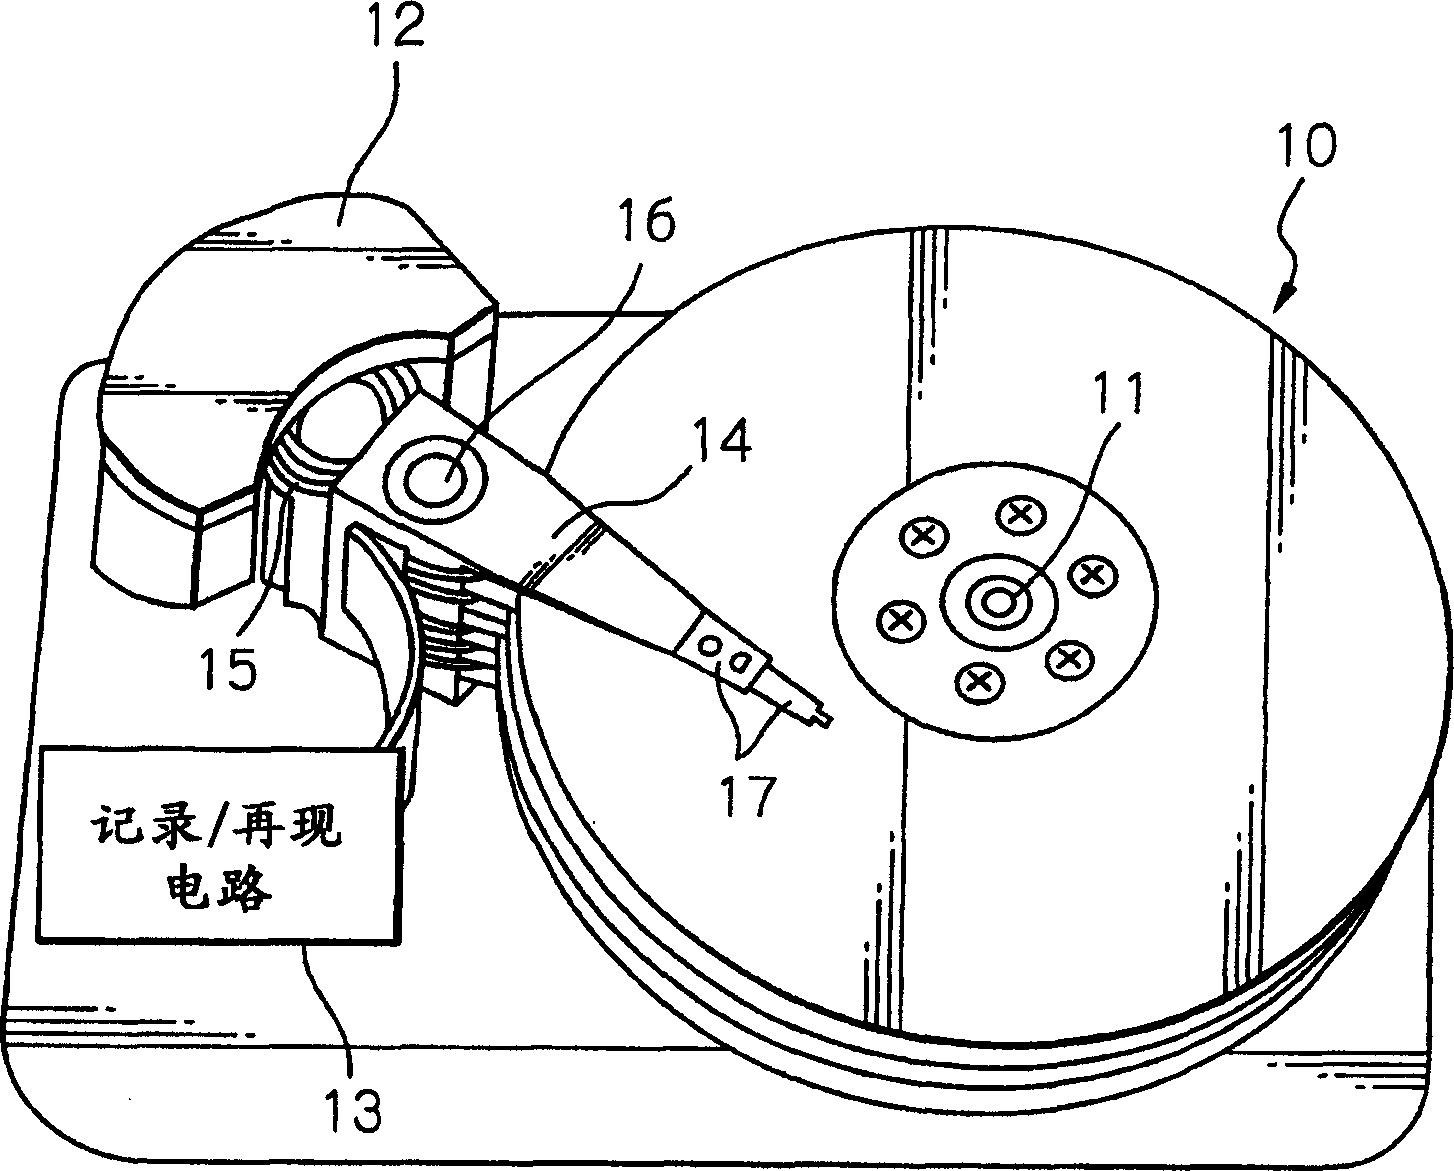 Thin-film magnetic head with heater, magnetic head gimbal assembly, and magnetic disk drive apparatus